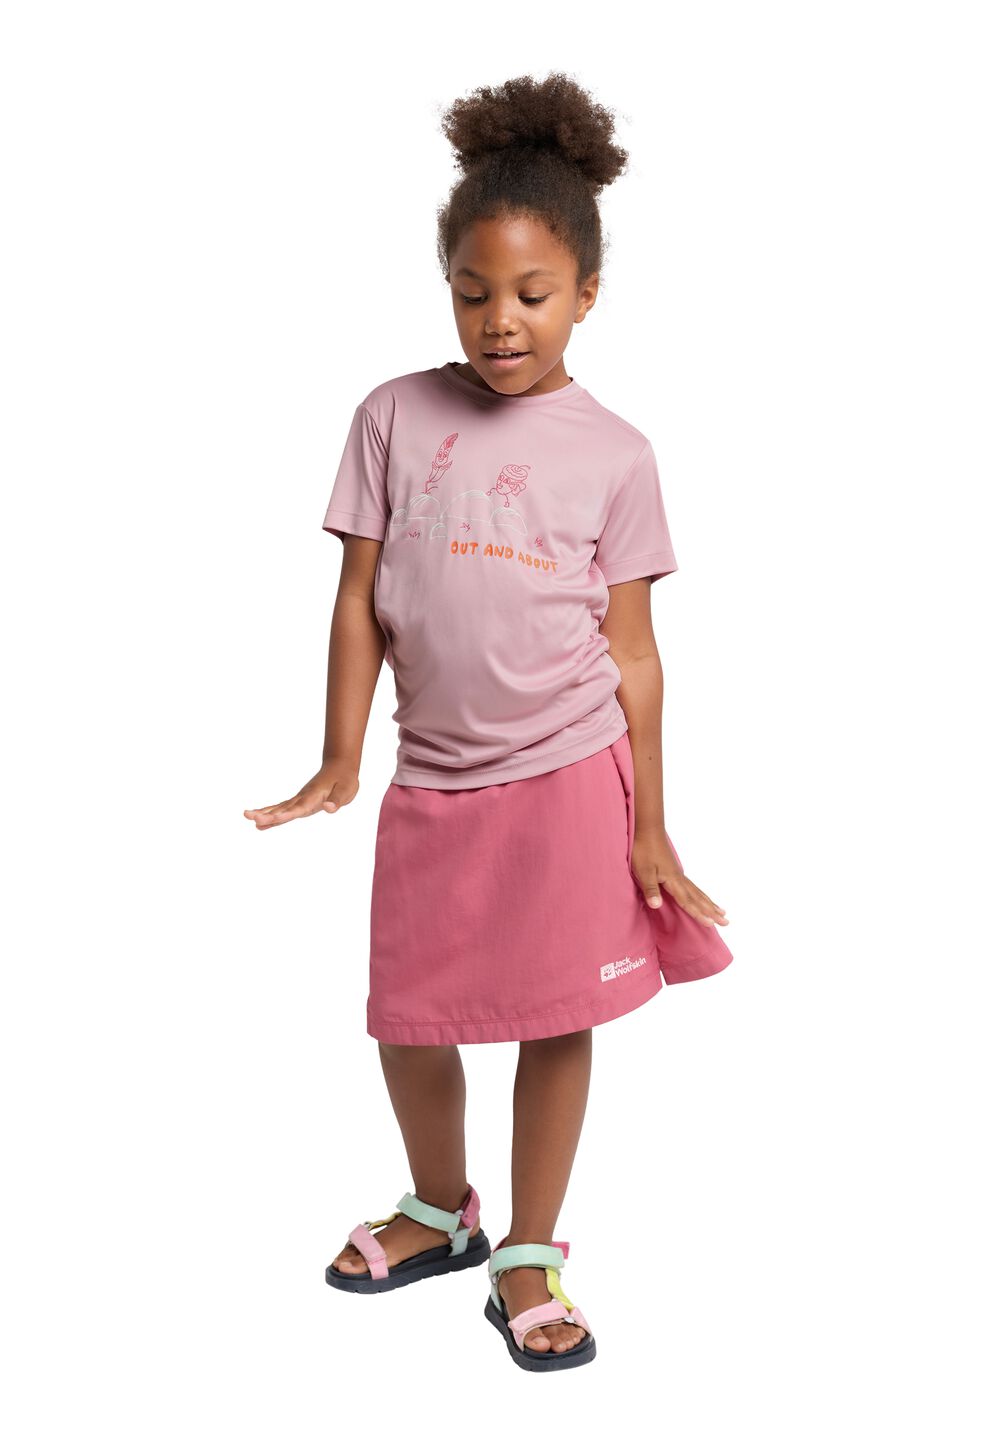 Jack Wolfskin OUT AND About T-Shirt Kids Functioneel shirt Kinderen 164 water lily water lily